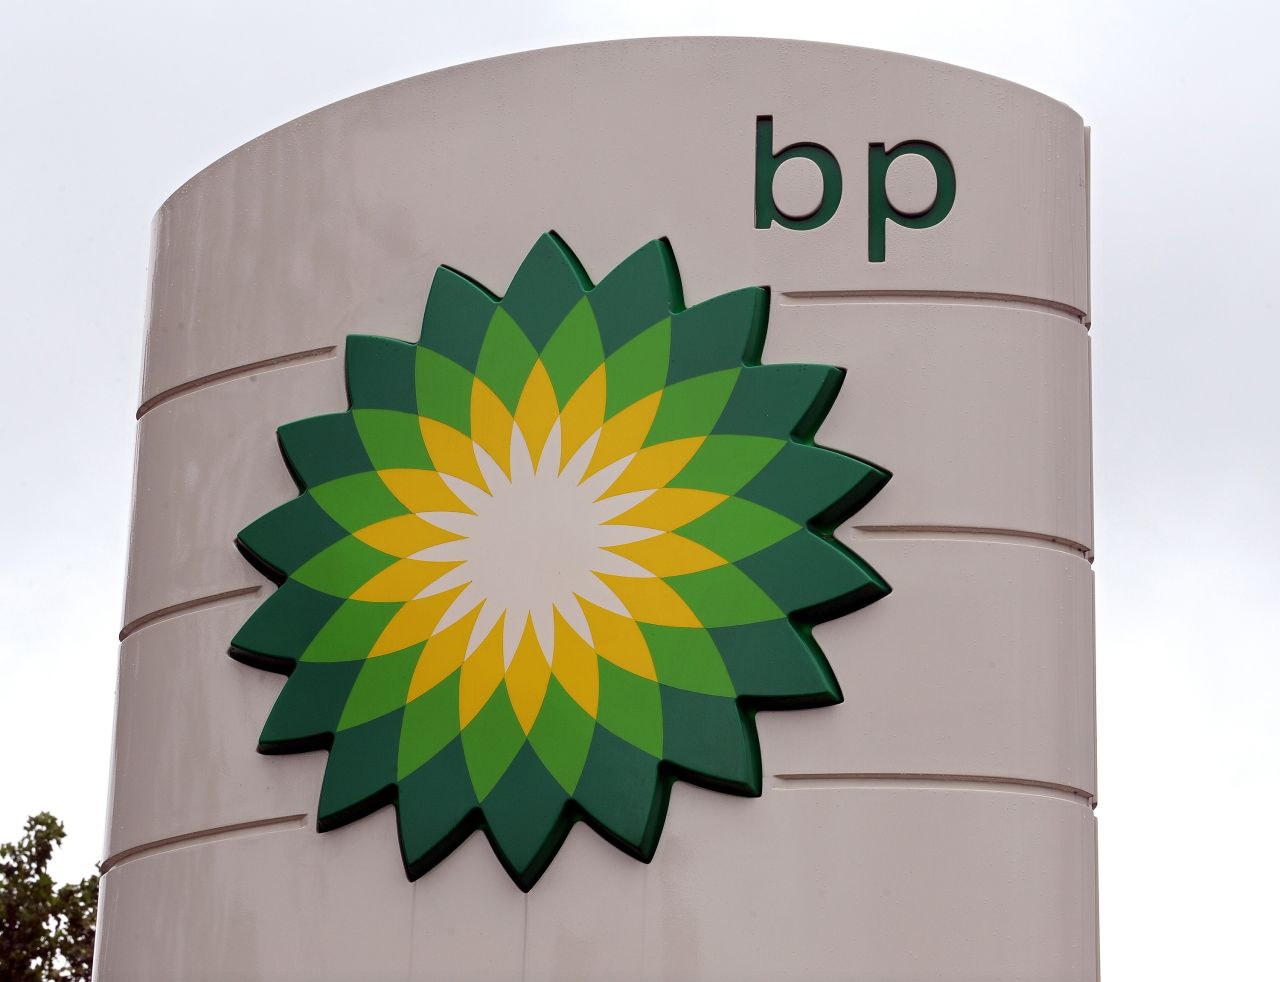 BP saw a rebound in its profits to $23.8 billion dollars from $11.2 billion the previous year, Fortune noted, pushing it up the ranks. 